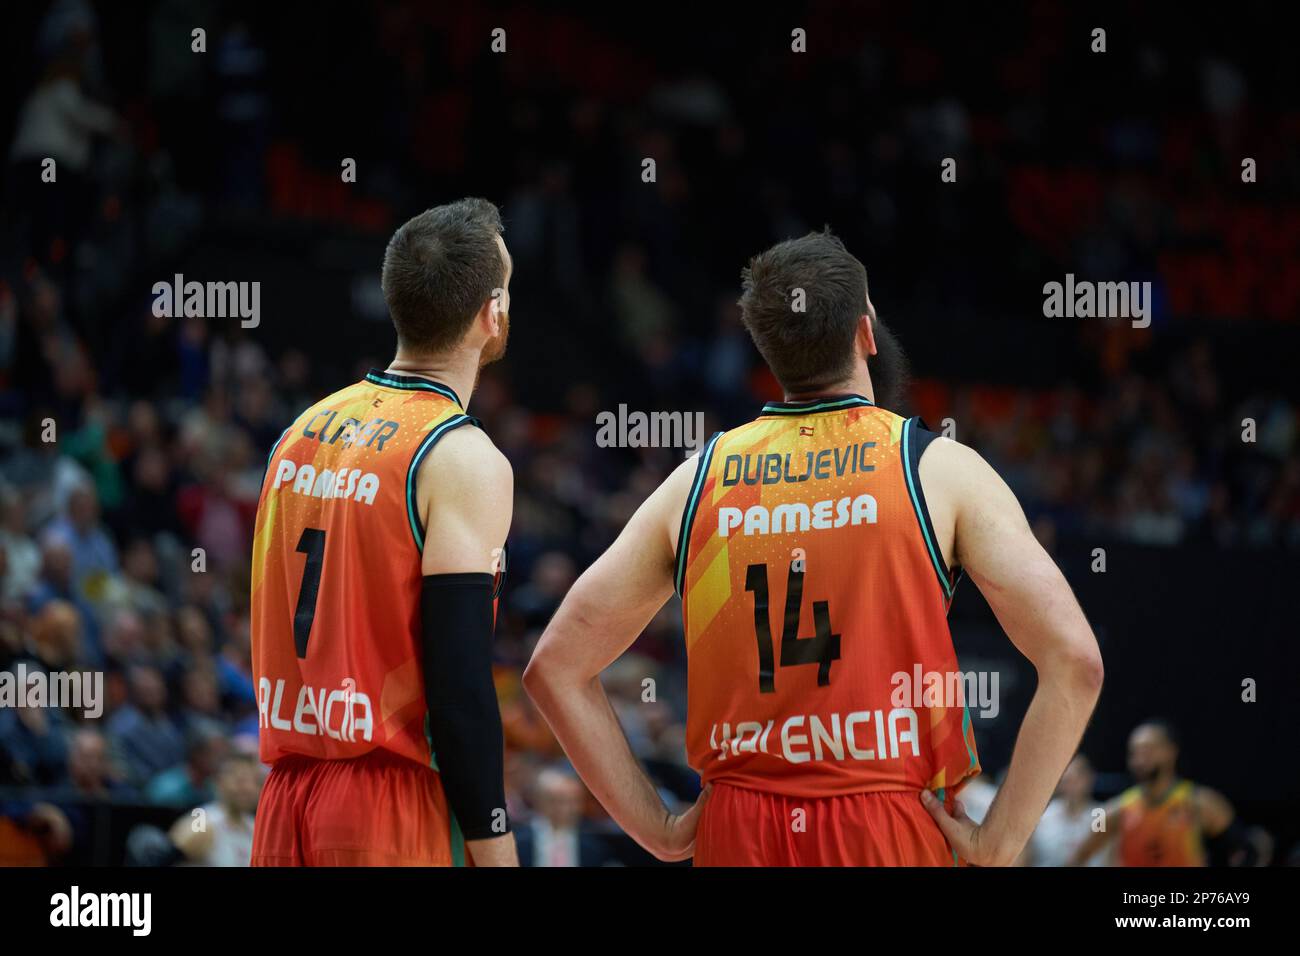 Victor Claver of Valencia basket (L) and Bojan Dublevic of Valencia basket (R) in action during the Turkish Airlines EuroLeague Regular Season Round 2 Stock Photo